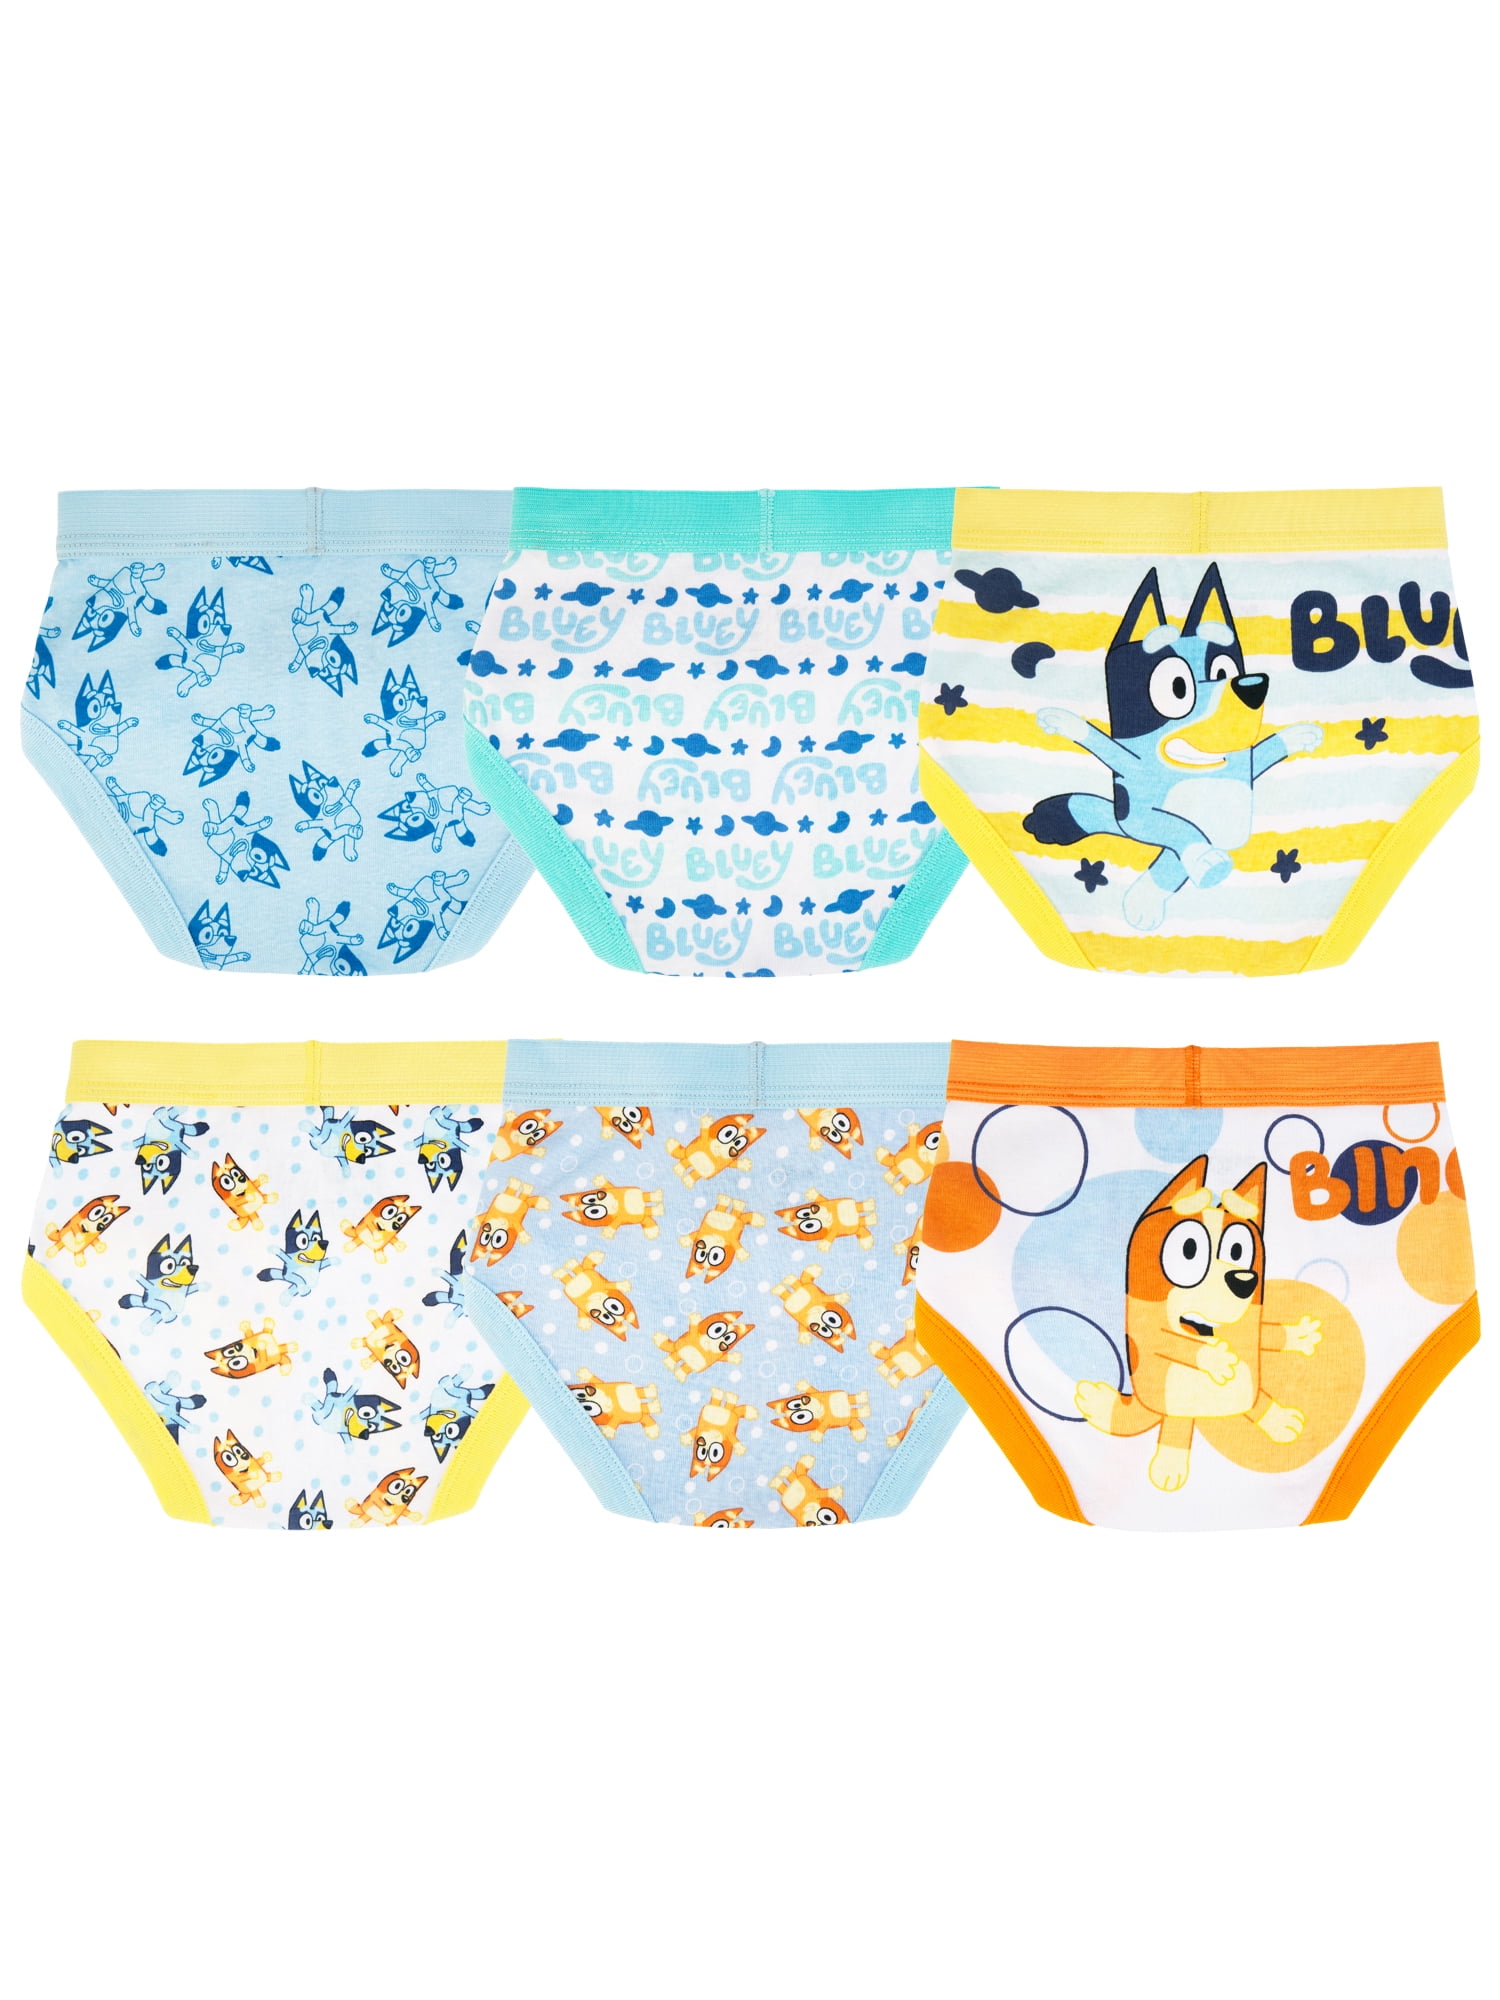 Bluey Toddler Boys Briefs, 6 Pack Sizes 2T-4T